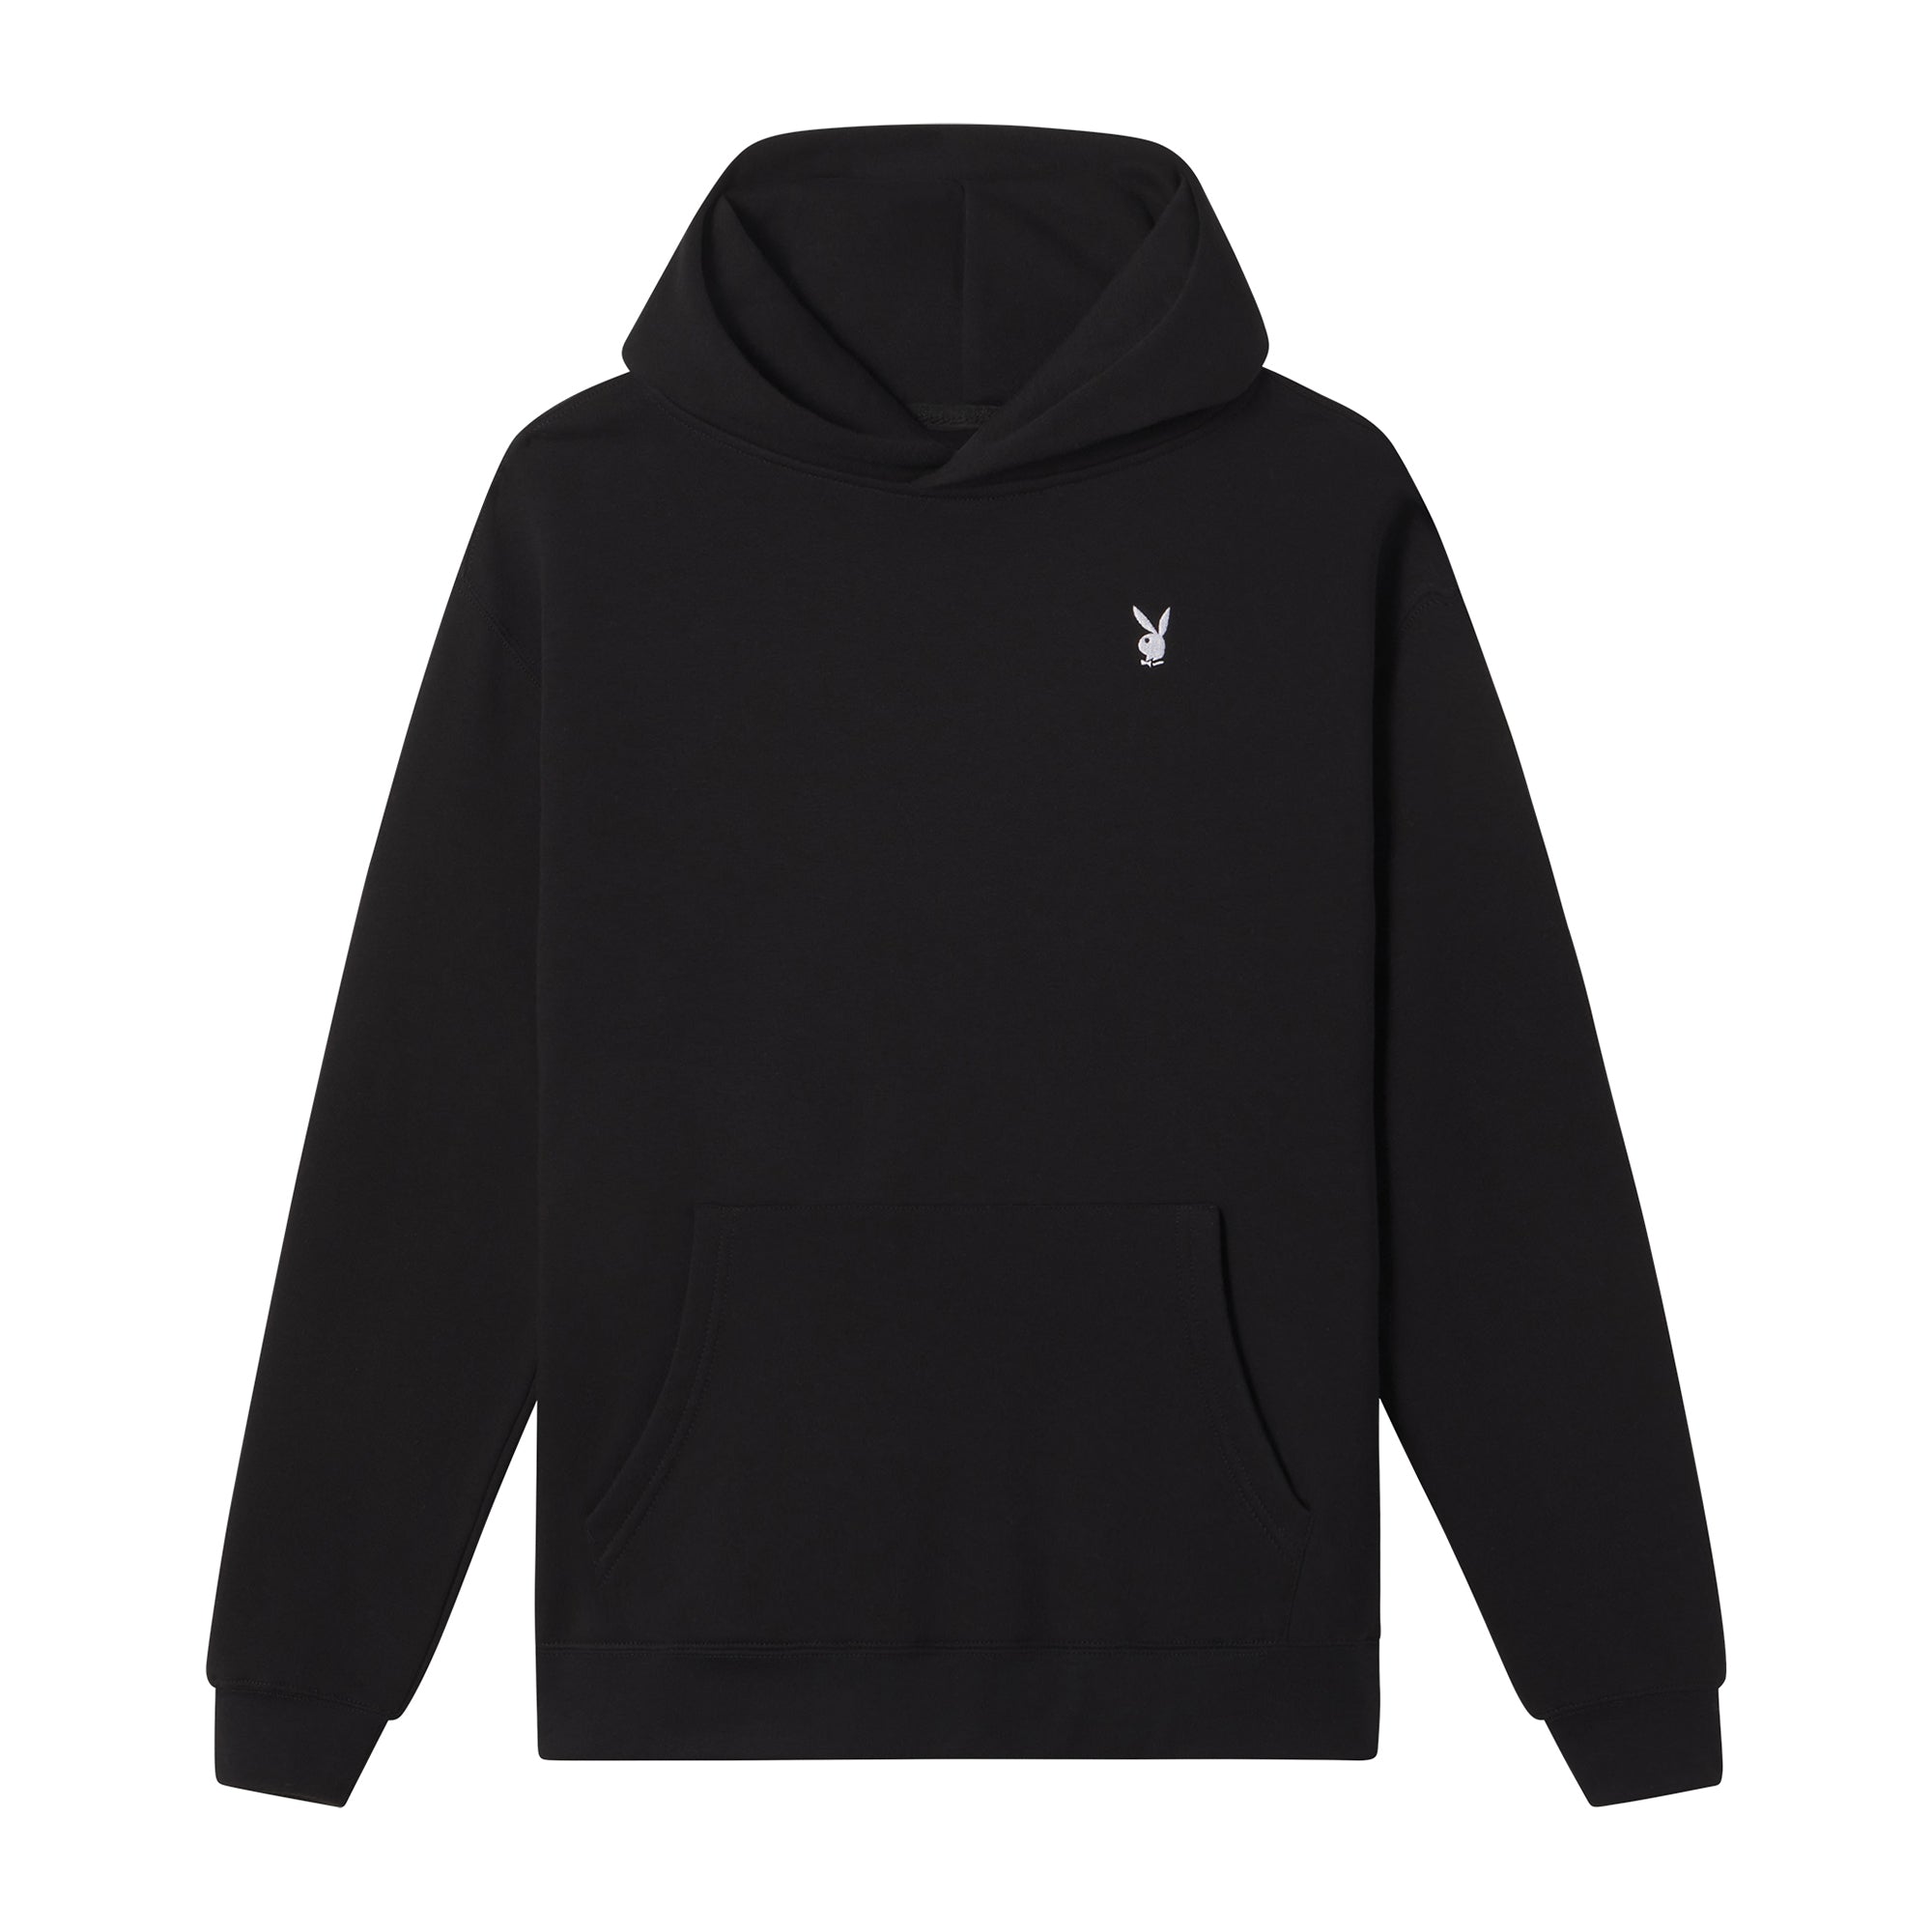 Men's Playboy Hoodie: Official Hoodies from Playboy.com – Page 4